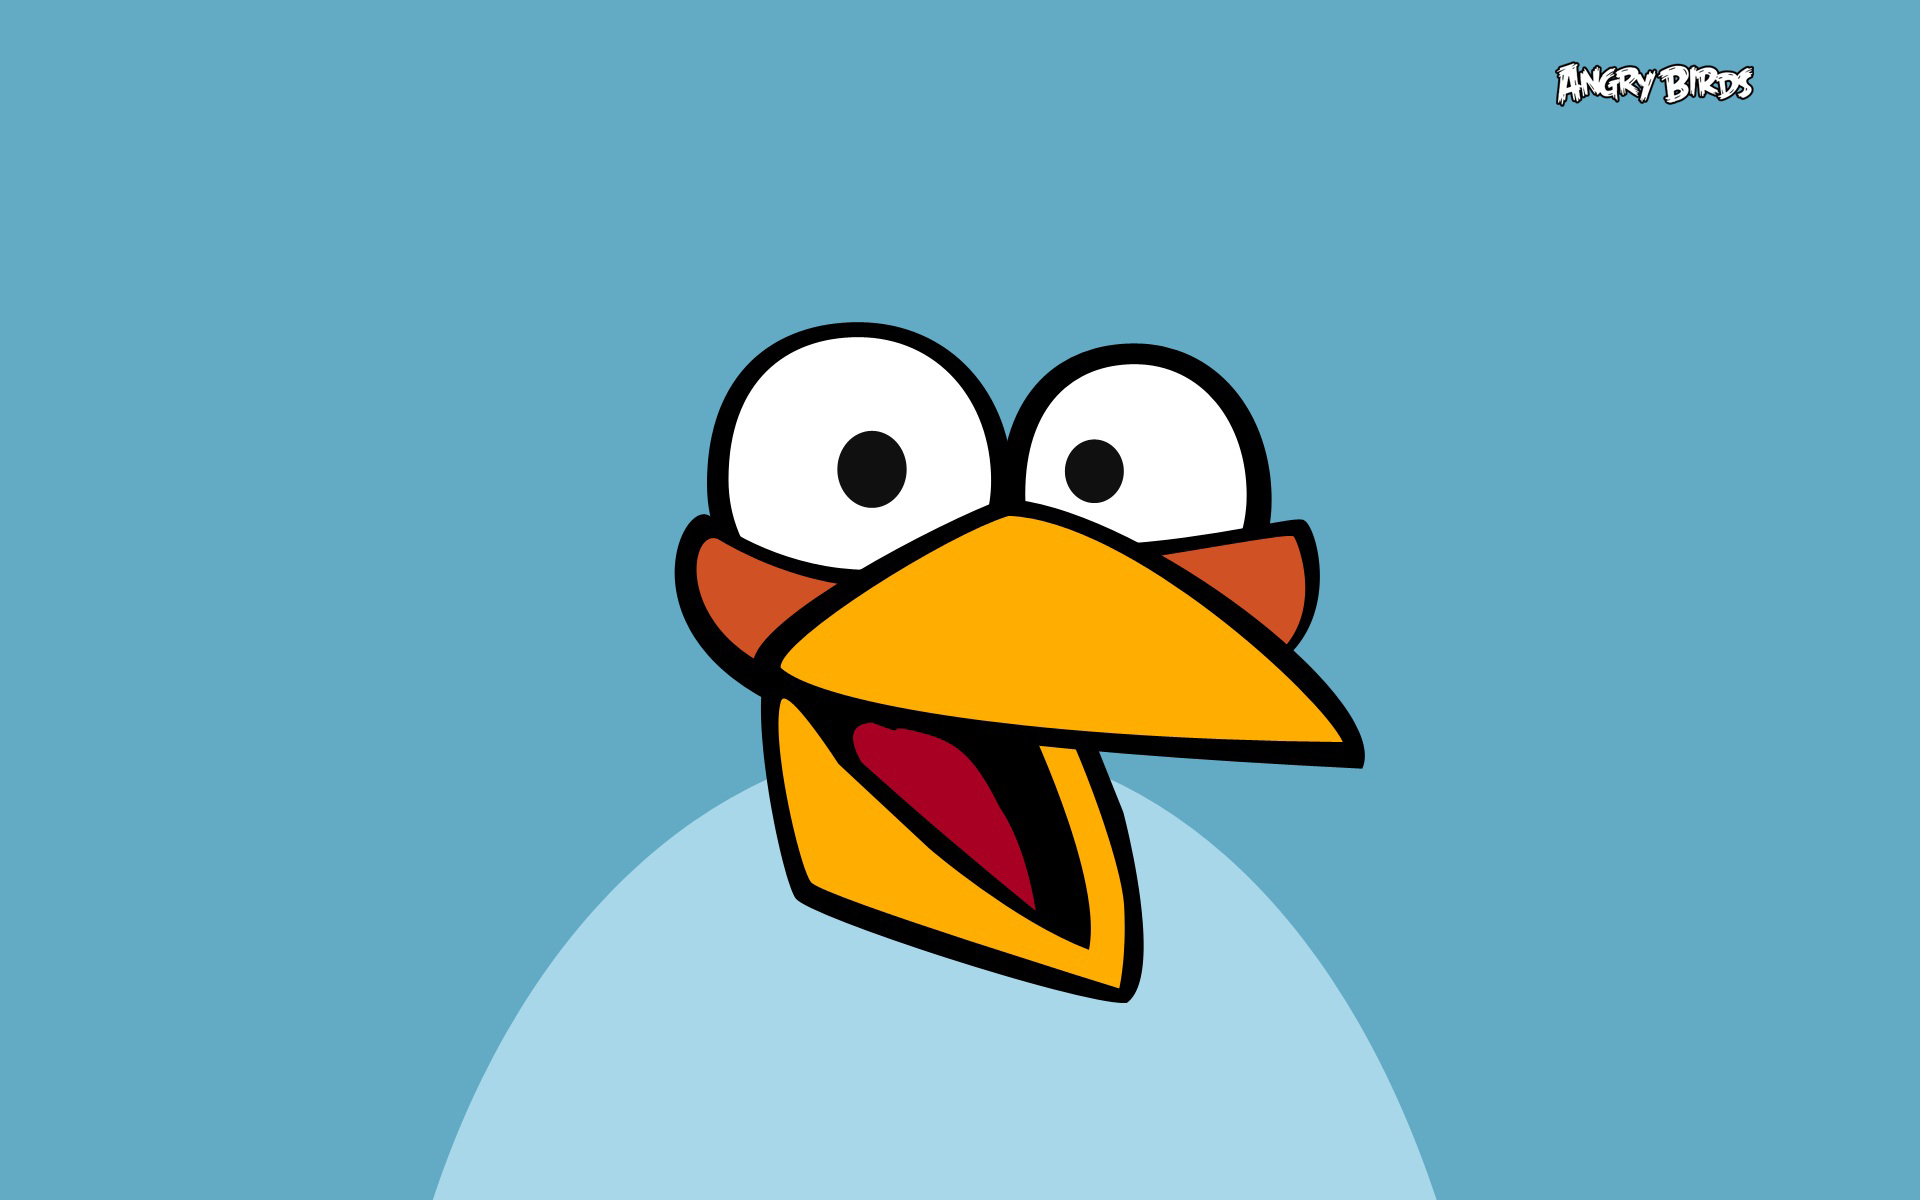 games, background, angry birds, turquoise